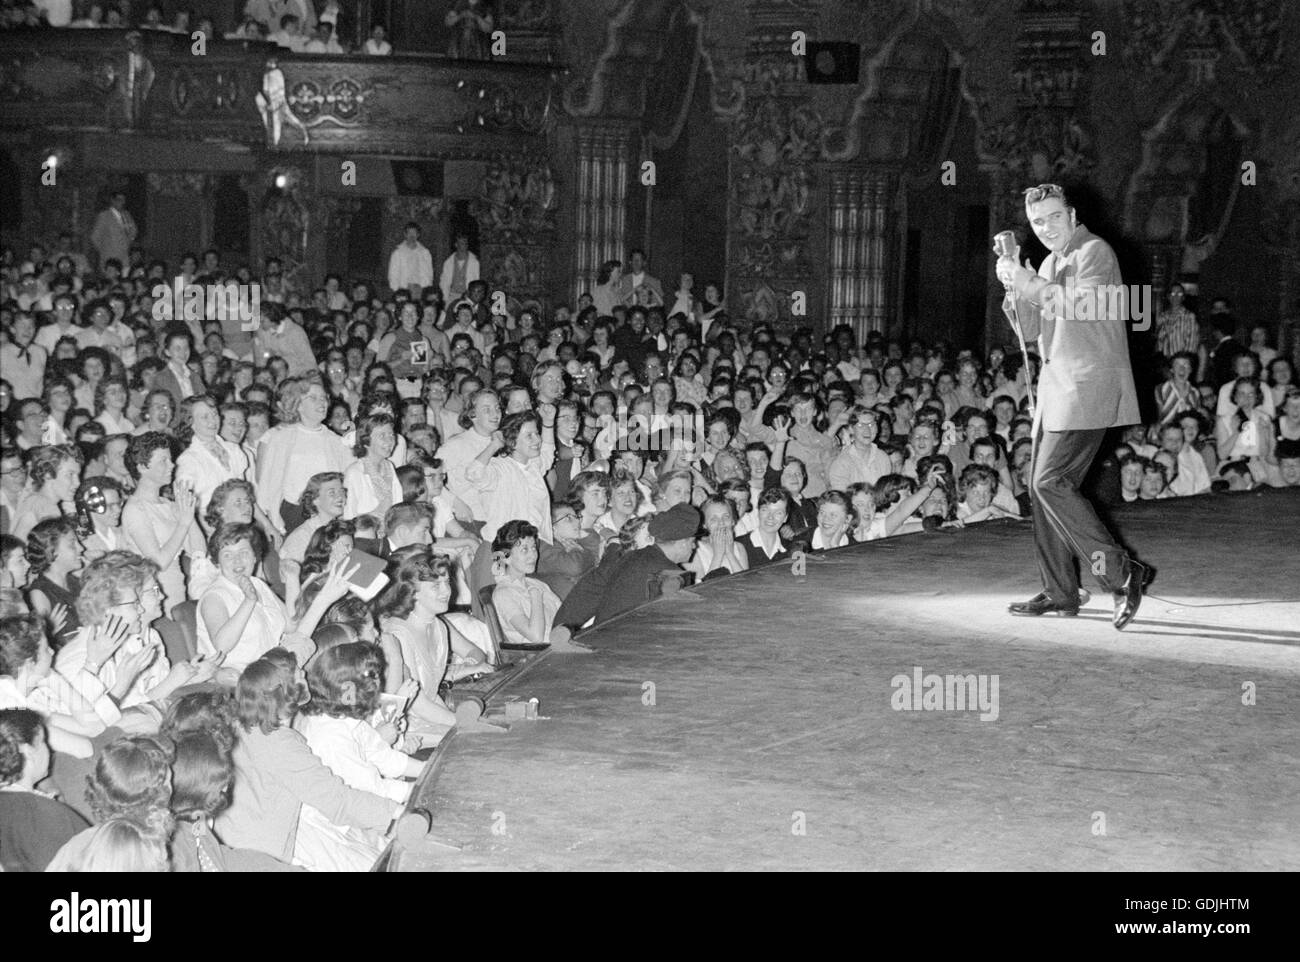 Elvis Presley in concert at the Fox Theater, Detroit, Michigan, May 25, 1956. Stock Photo